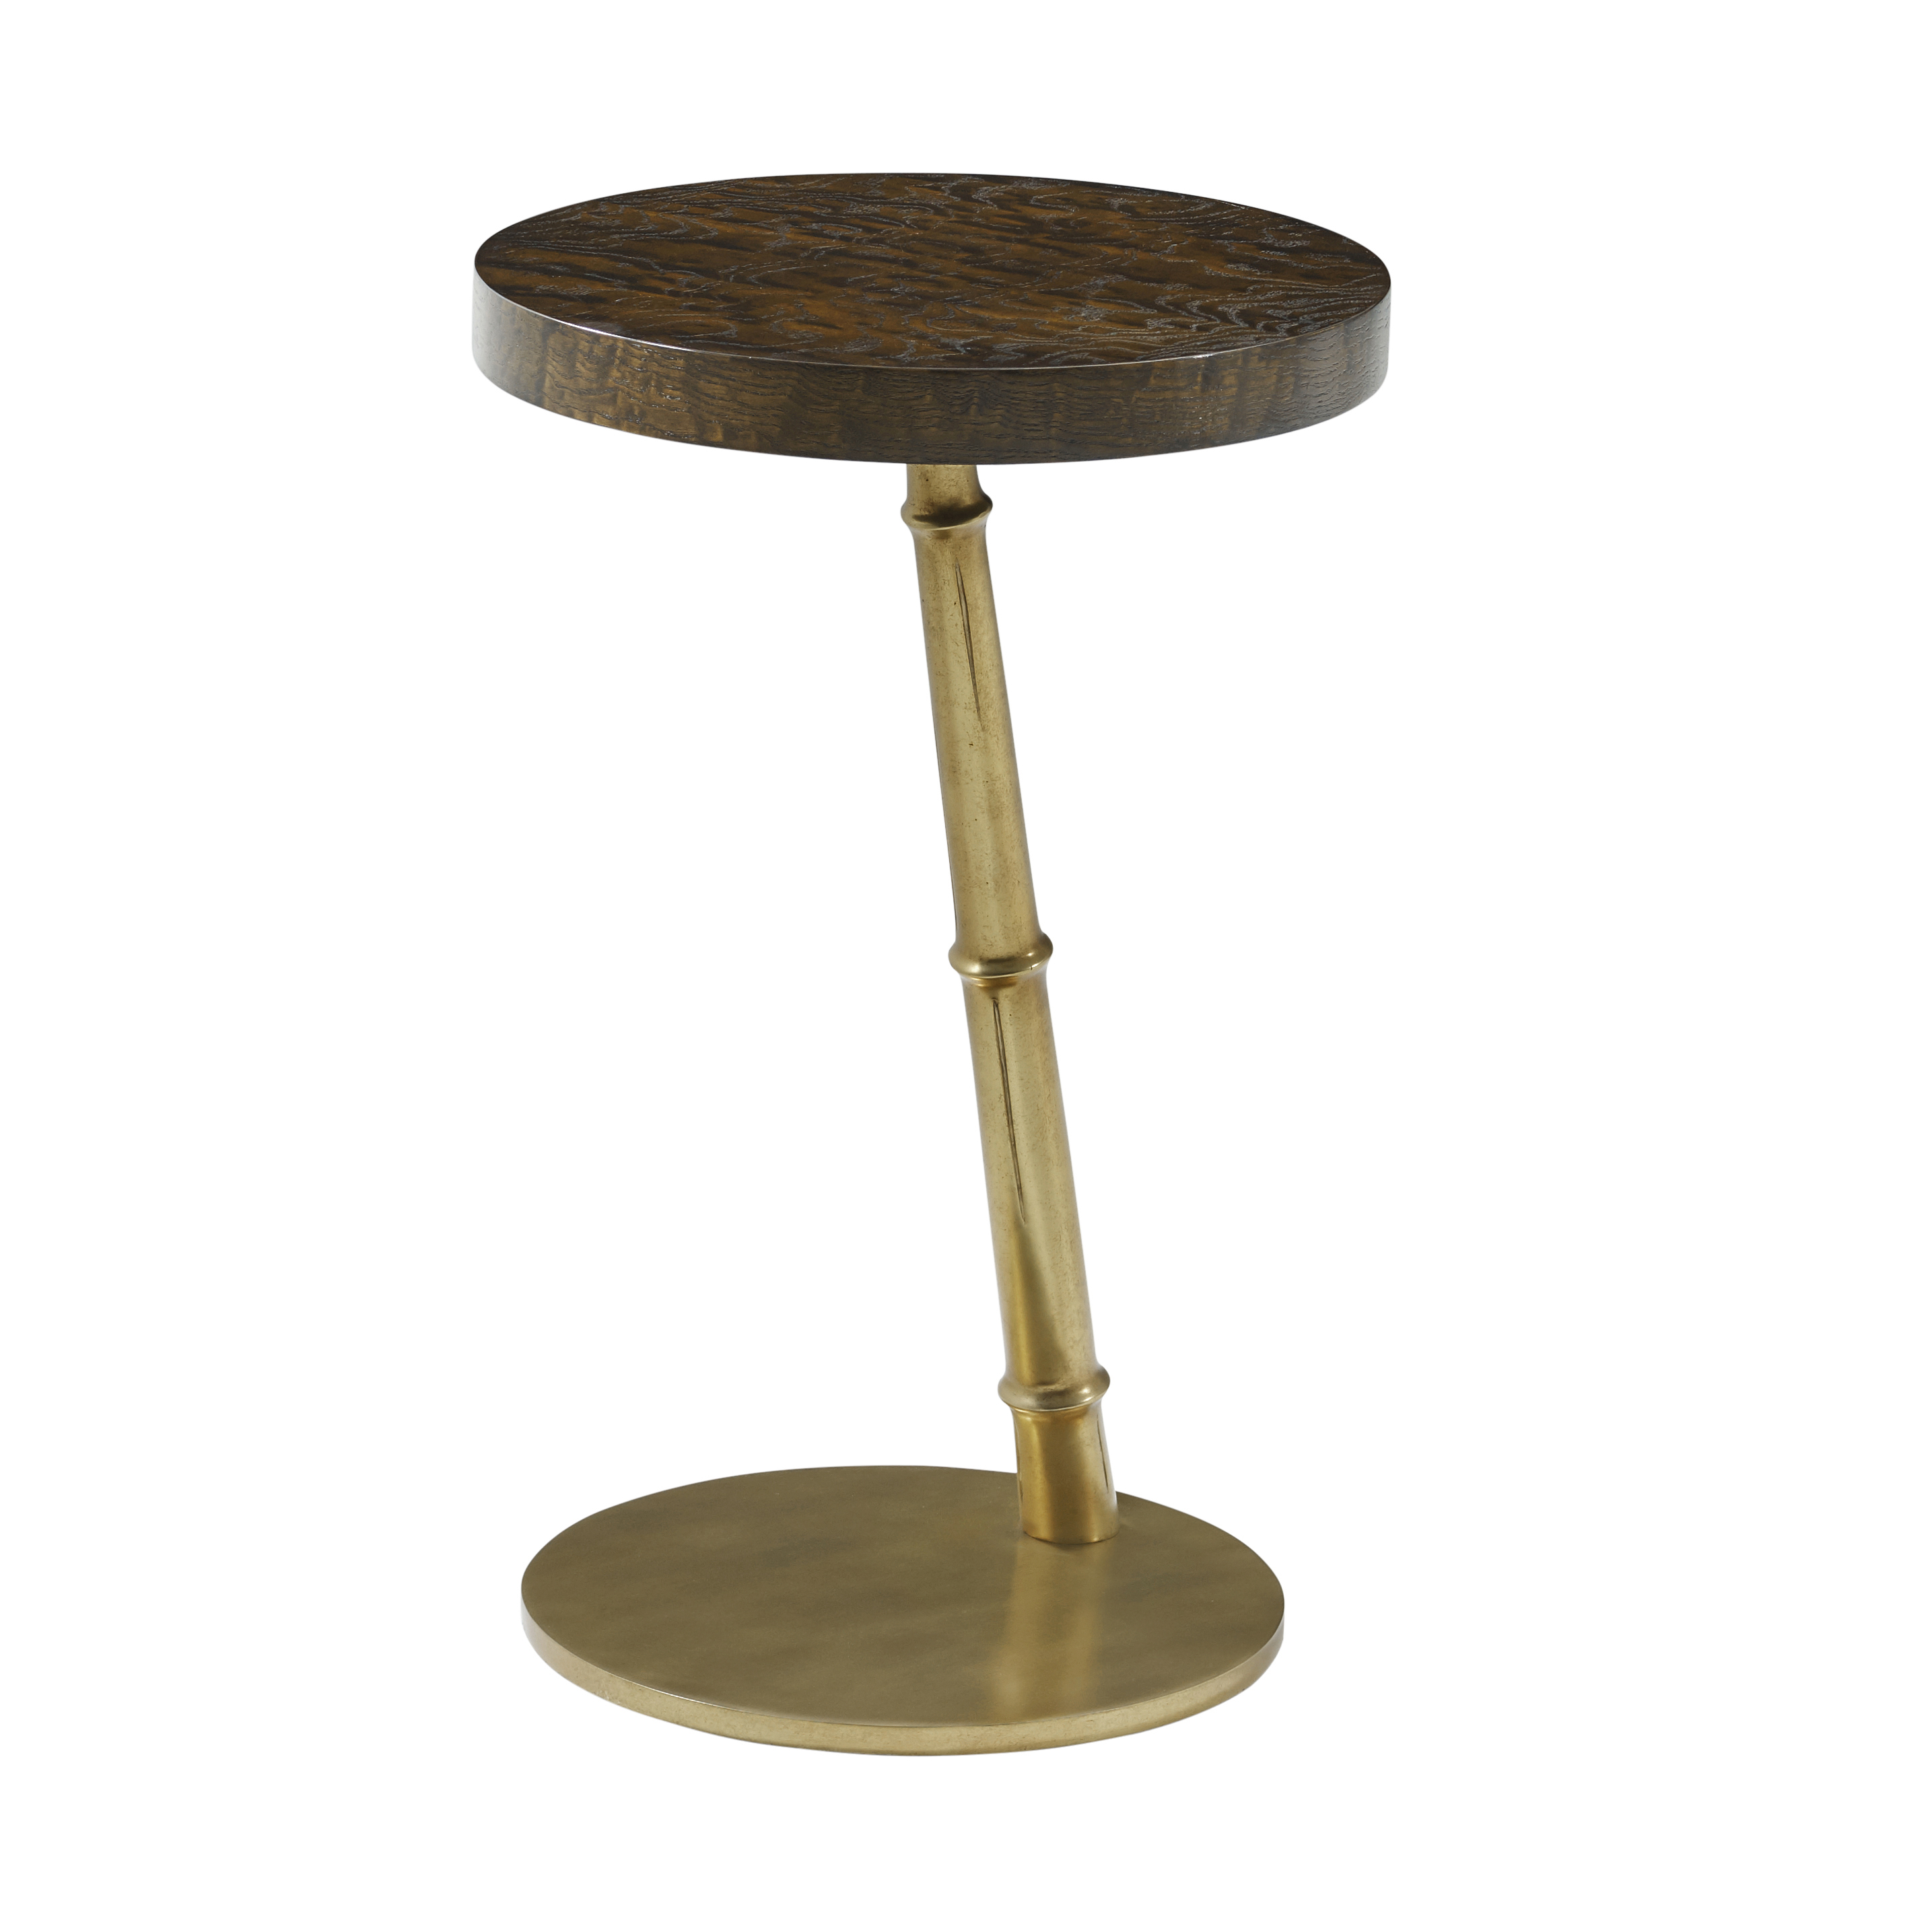 KESDEN ACCENT TABLE